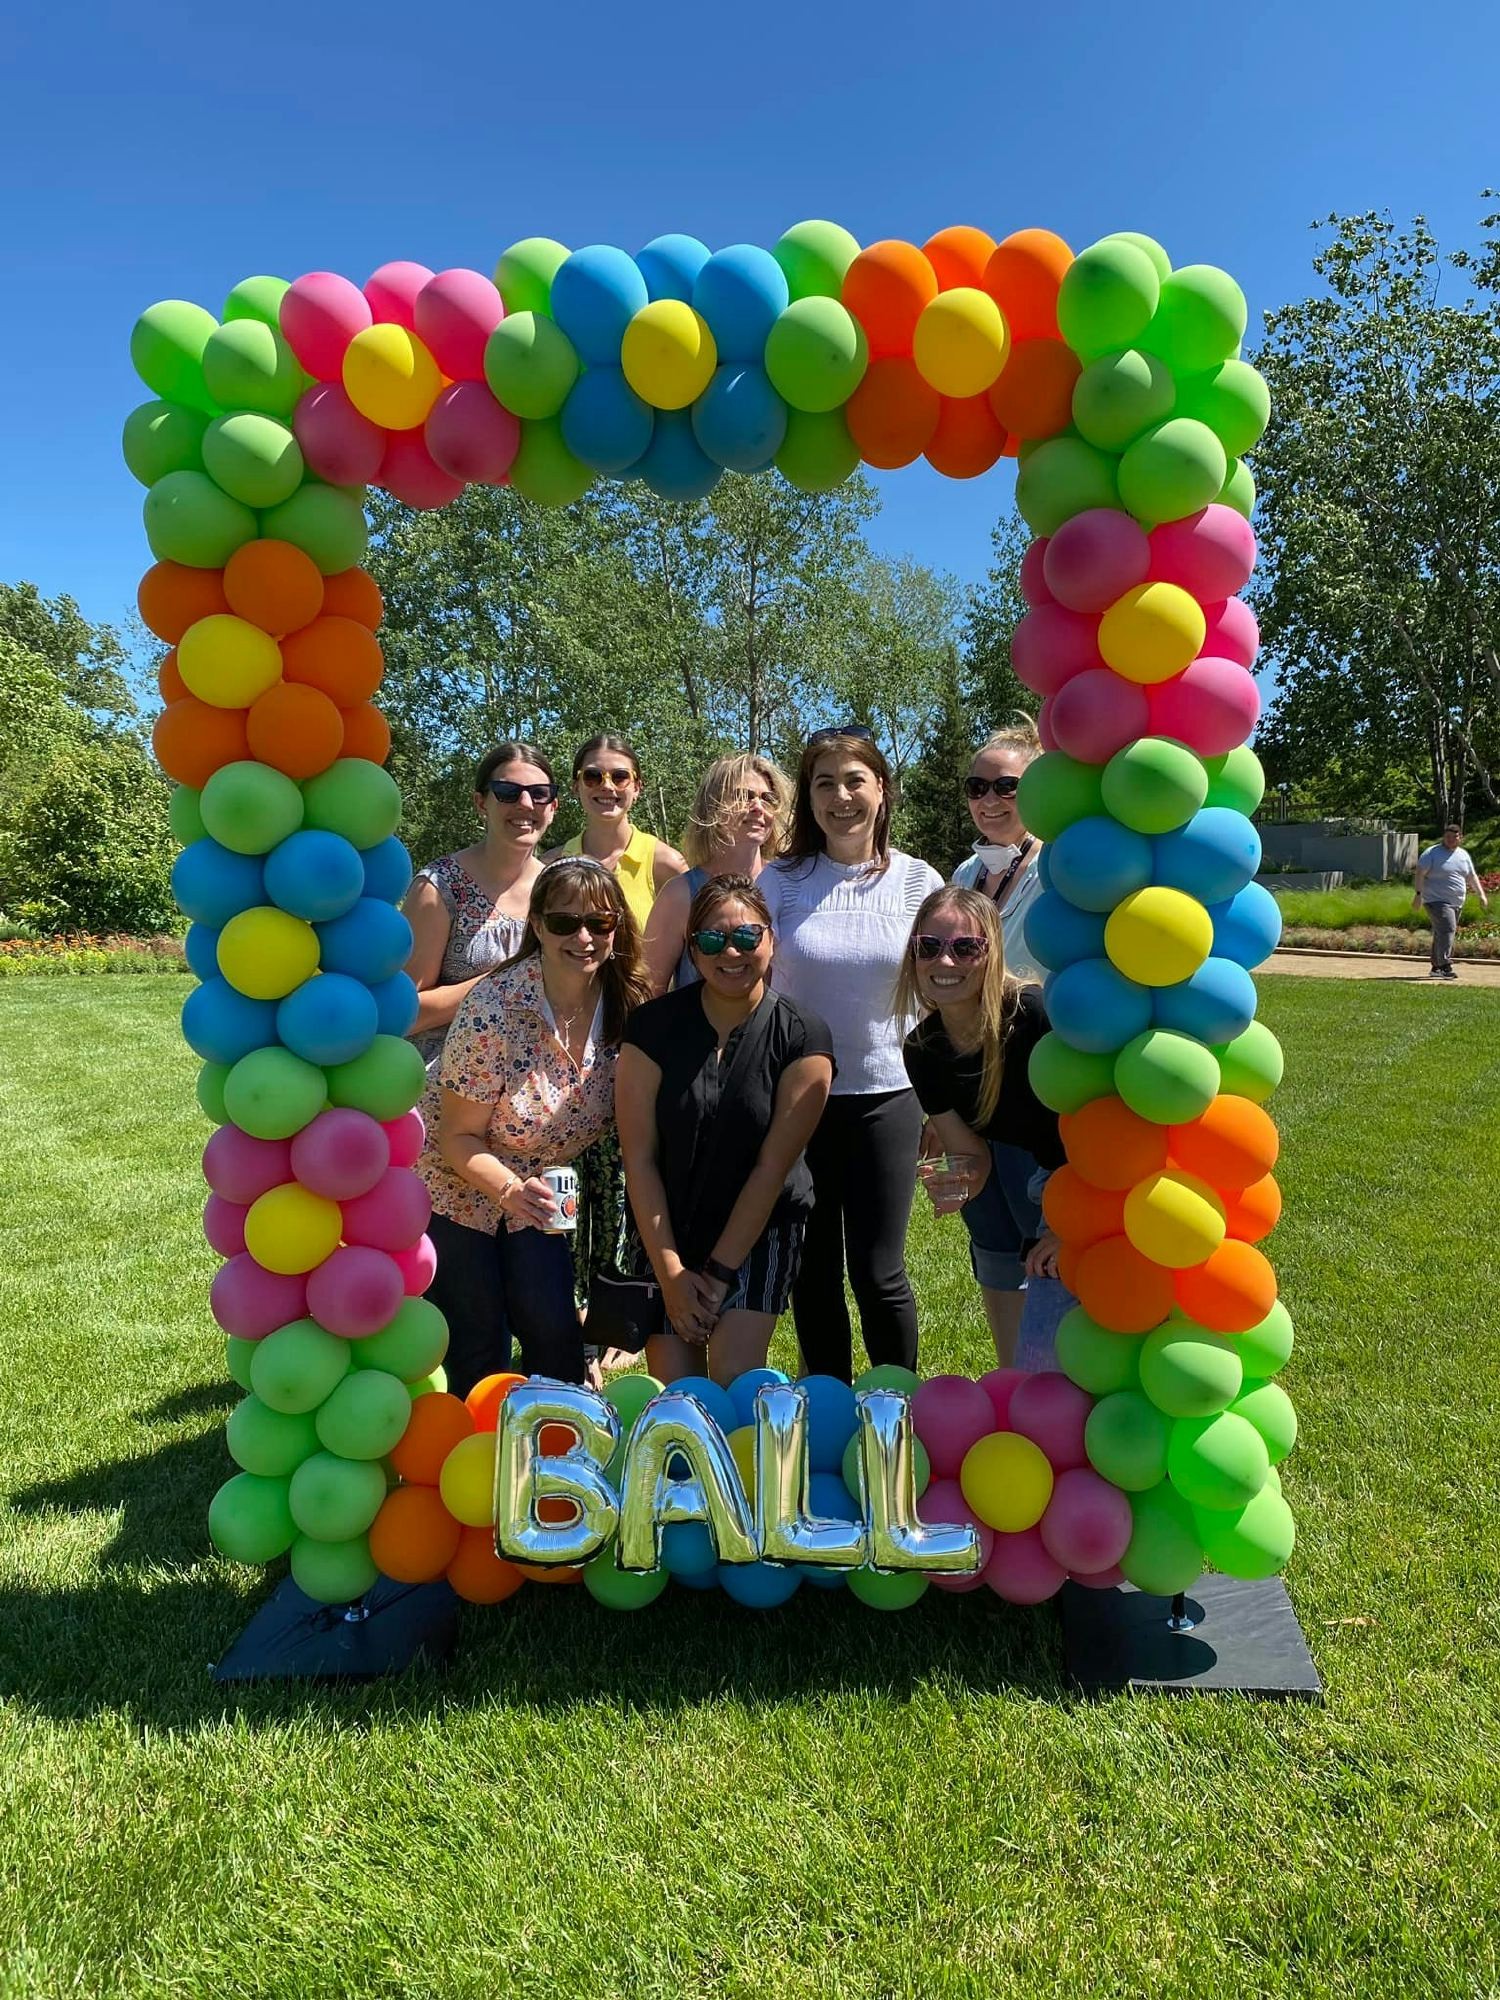 Garden Party hosted on our grounds for employees to have fun, celebrate wins, and socialize!